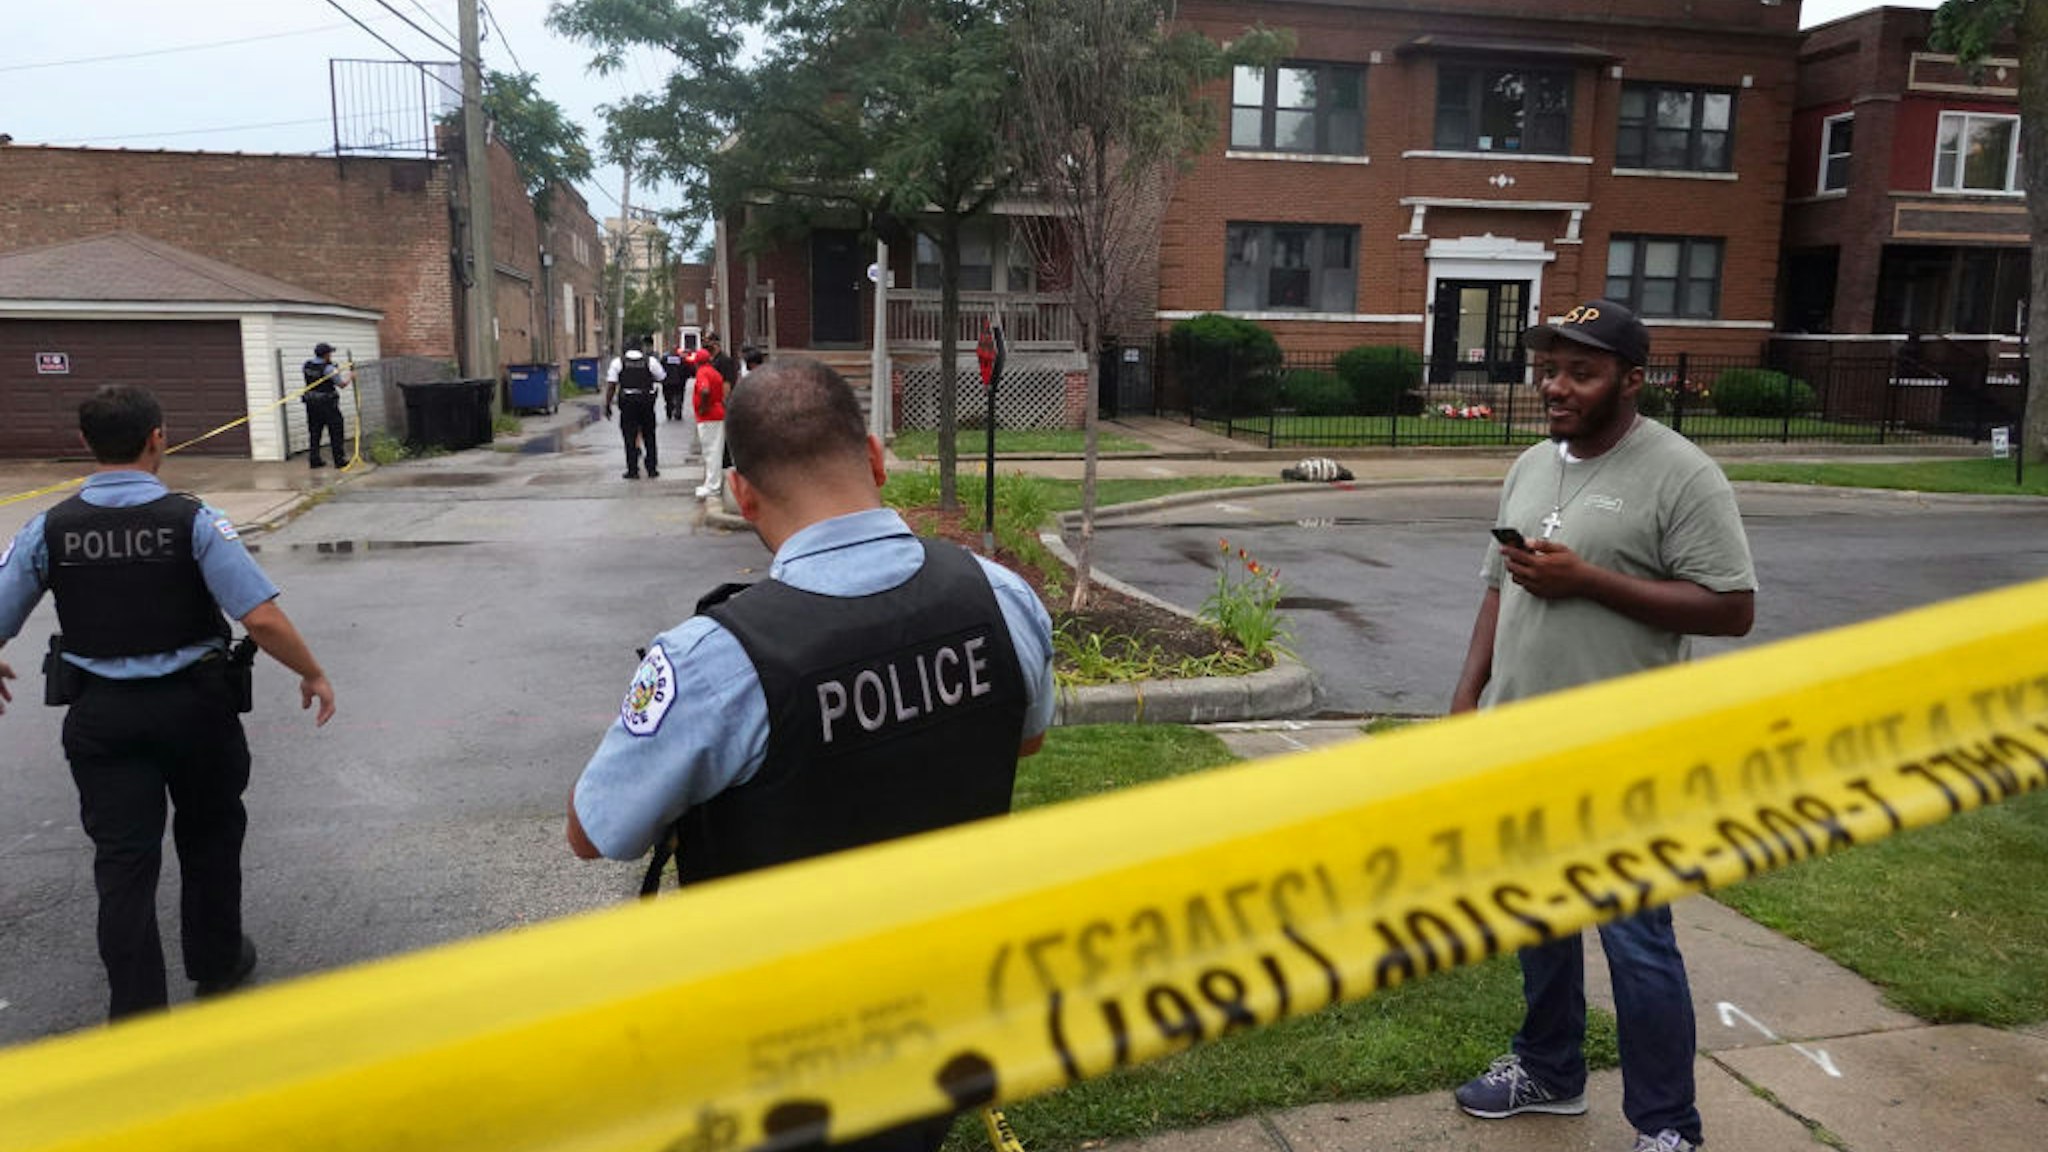 CHICAGO, ILLINOIS - JULY 21: Police secure the scene of a shooting in the Auburn Gresham neighborhood on July 21, 2020 in Chicago, Illinois. At least 14 people were transported to area hospitals after several gunmen opened fire on mourners standing outside of a funeral home. More than 2000 people have been shot and more than 400 have been murdered in Chicago so far this year. (Photo by Scott Olson/Getty Images)